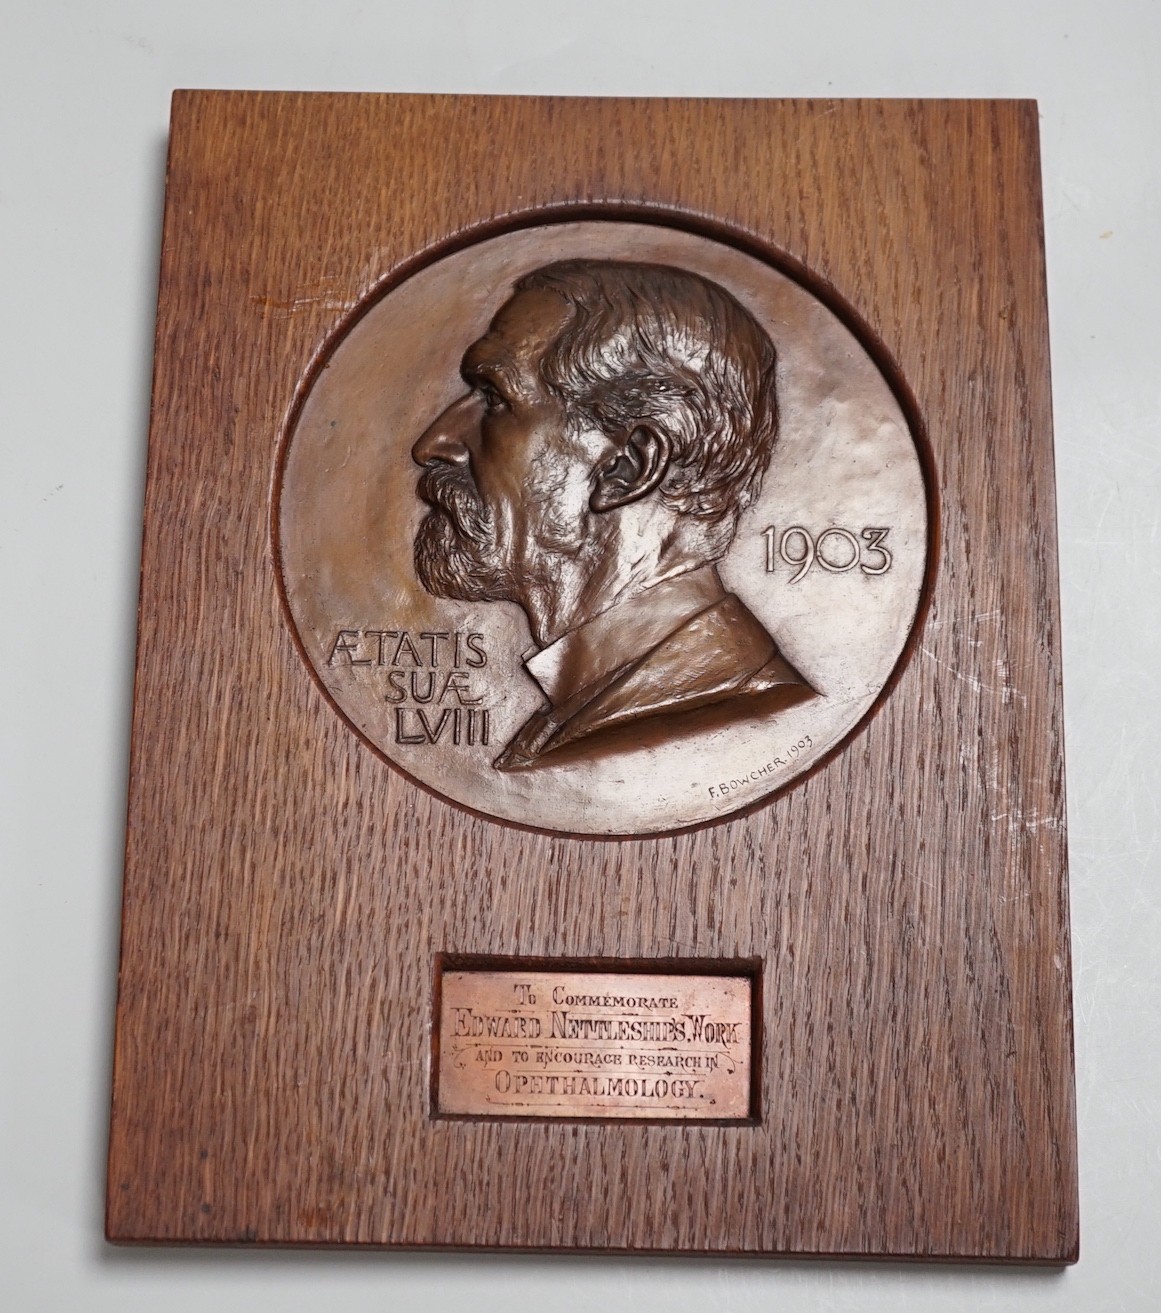 Frank Bowcher (1864-1938) bronze portrait relief plaque ‘To commemorate Edward Nettleships work and to encourage research in ophthalmology’ dated 1903, oak frame 28.5 x 21.5 cm